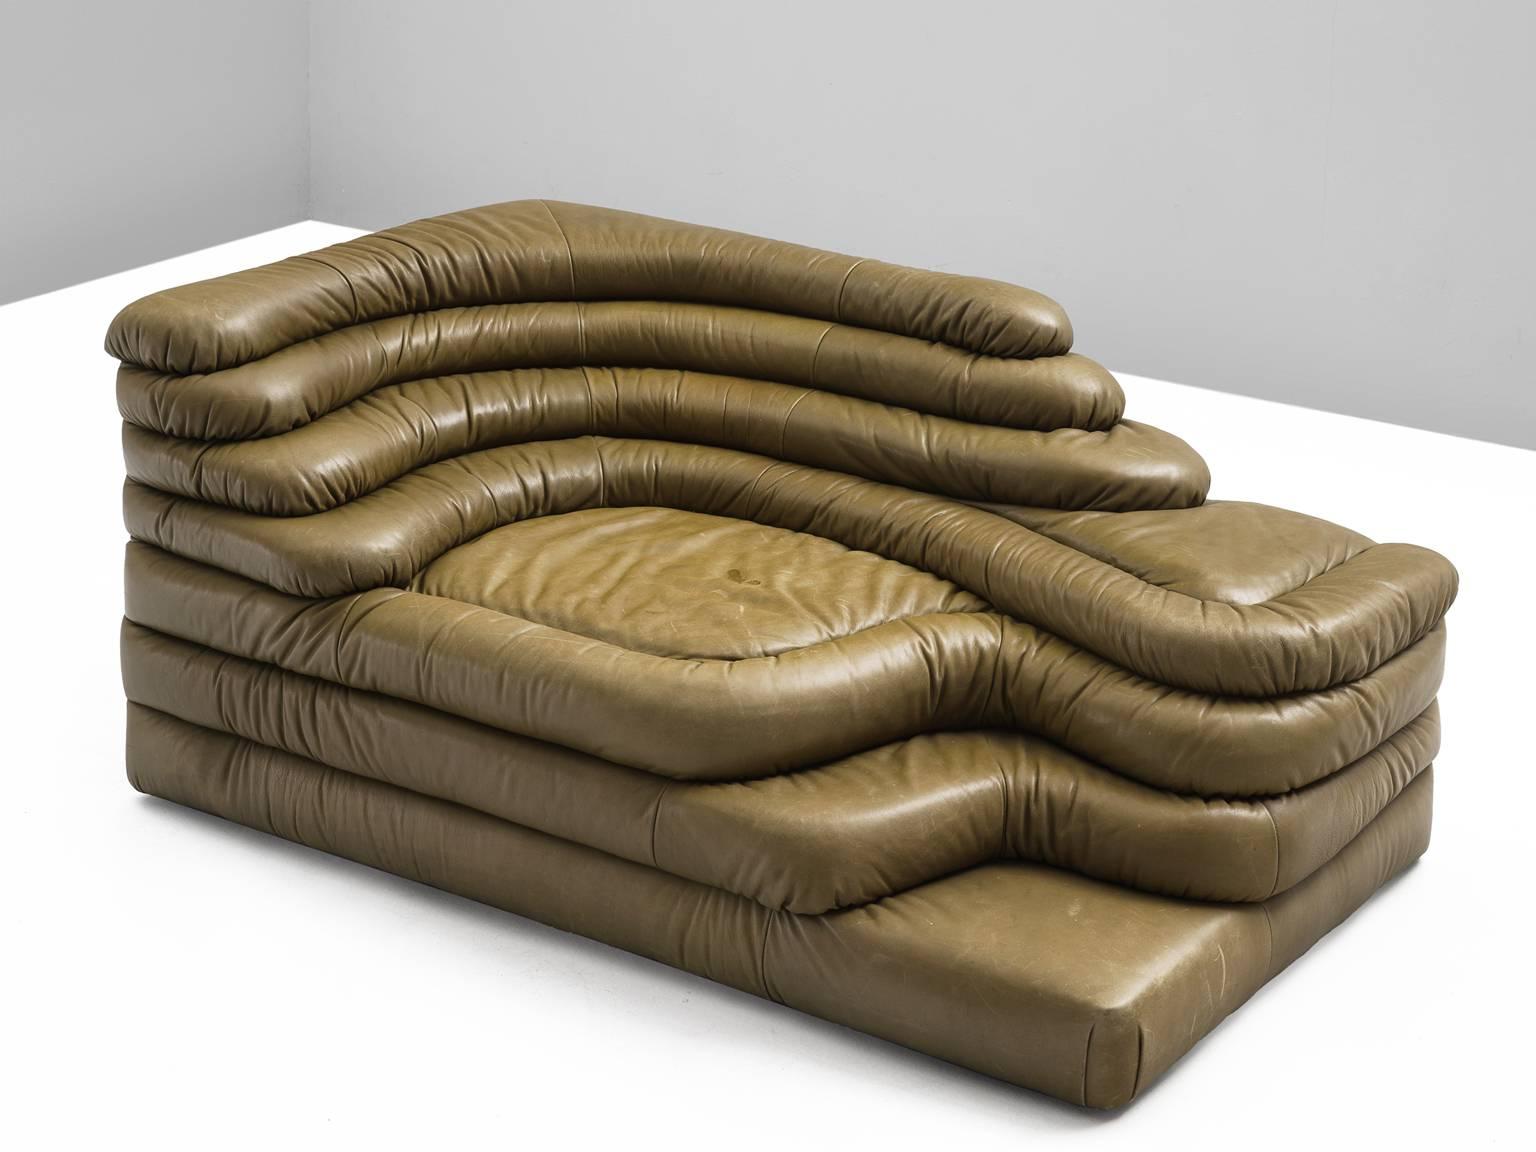 One DS1025 'Terrazza' landscape elements, in olive green leather, by Ubald Klug for De Sede, Switzerland, 1970s. 

Wonderful leather waterfall shaped sofa in olive green leather by the Swiss manufacturer De Sede. This company is known for its